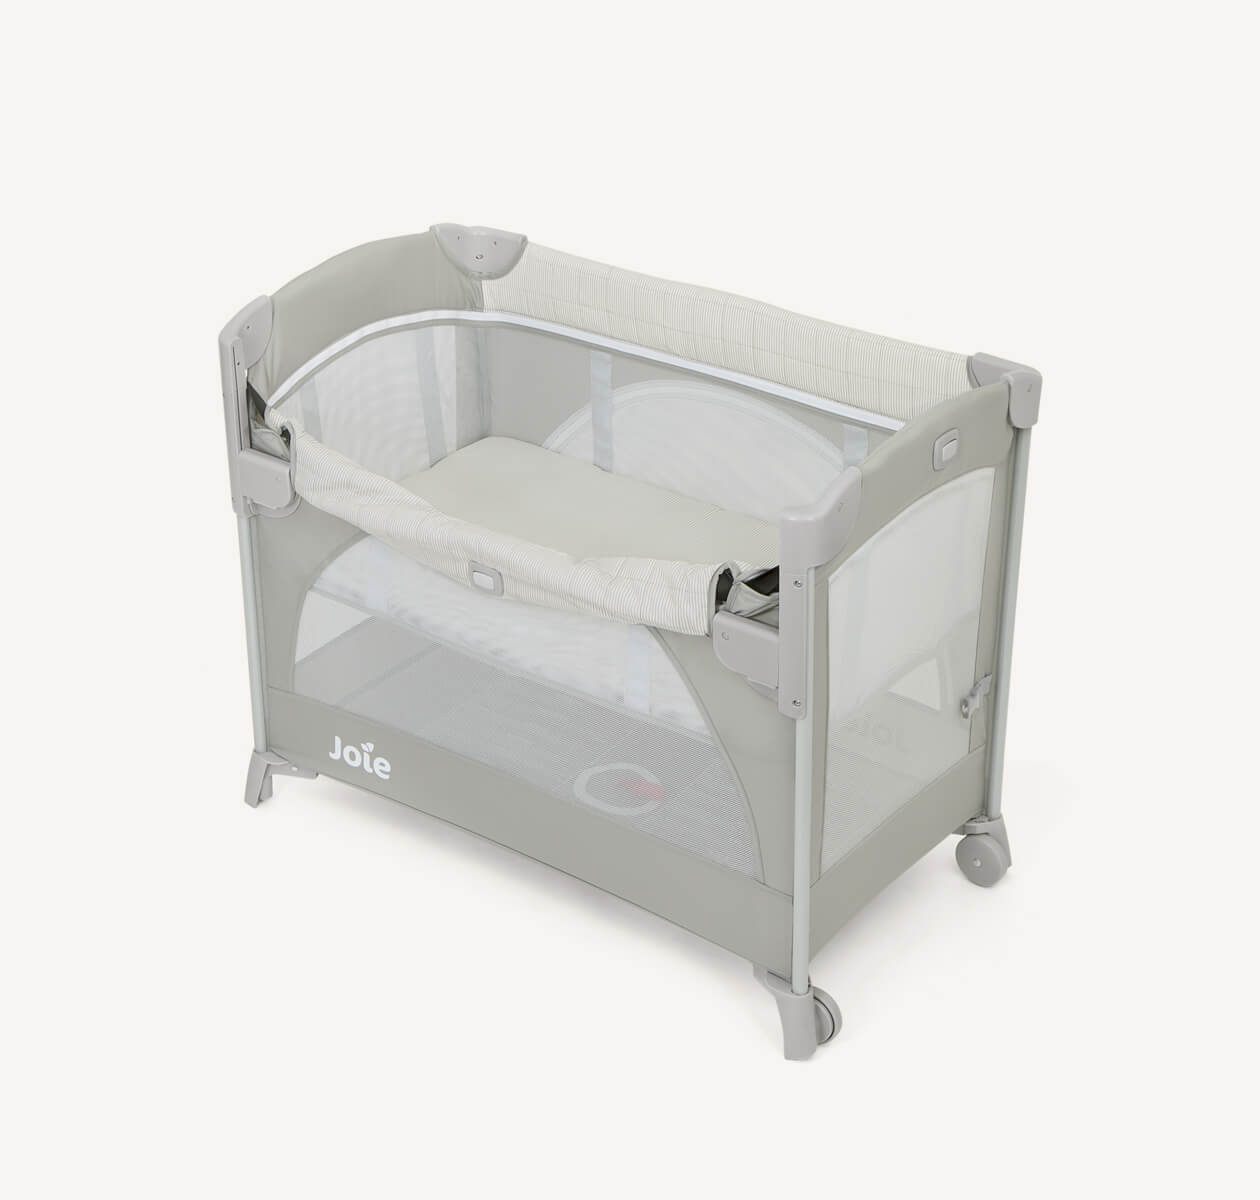 Joie kubbie sleep bedside cot in two-tone gray with drop down side down at an angle.